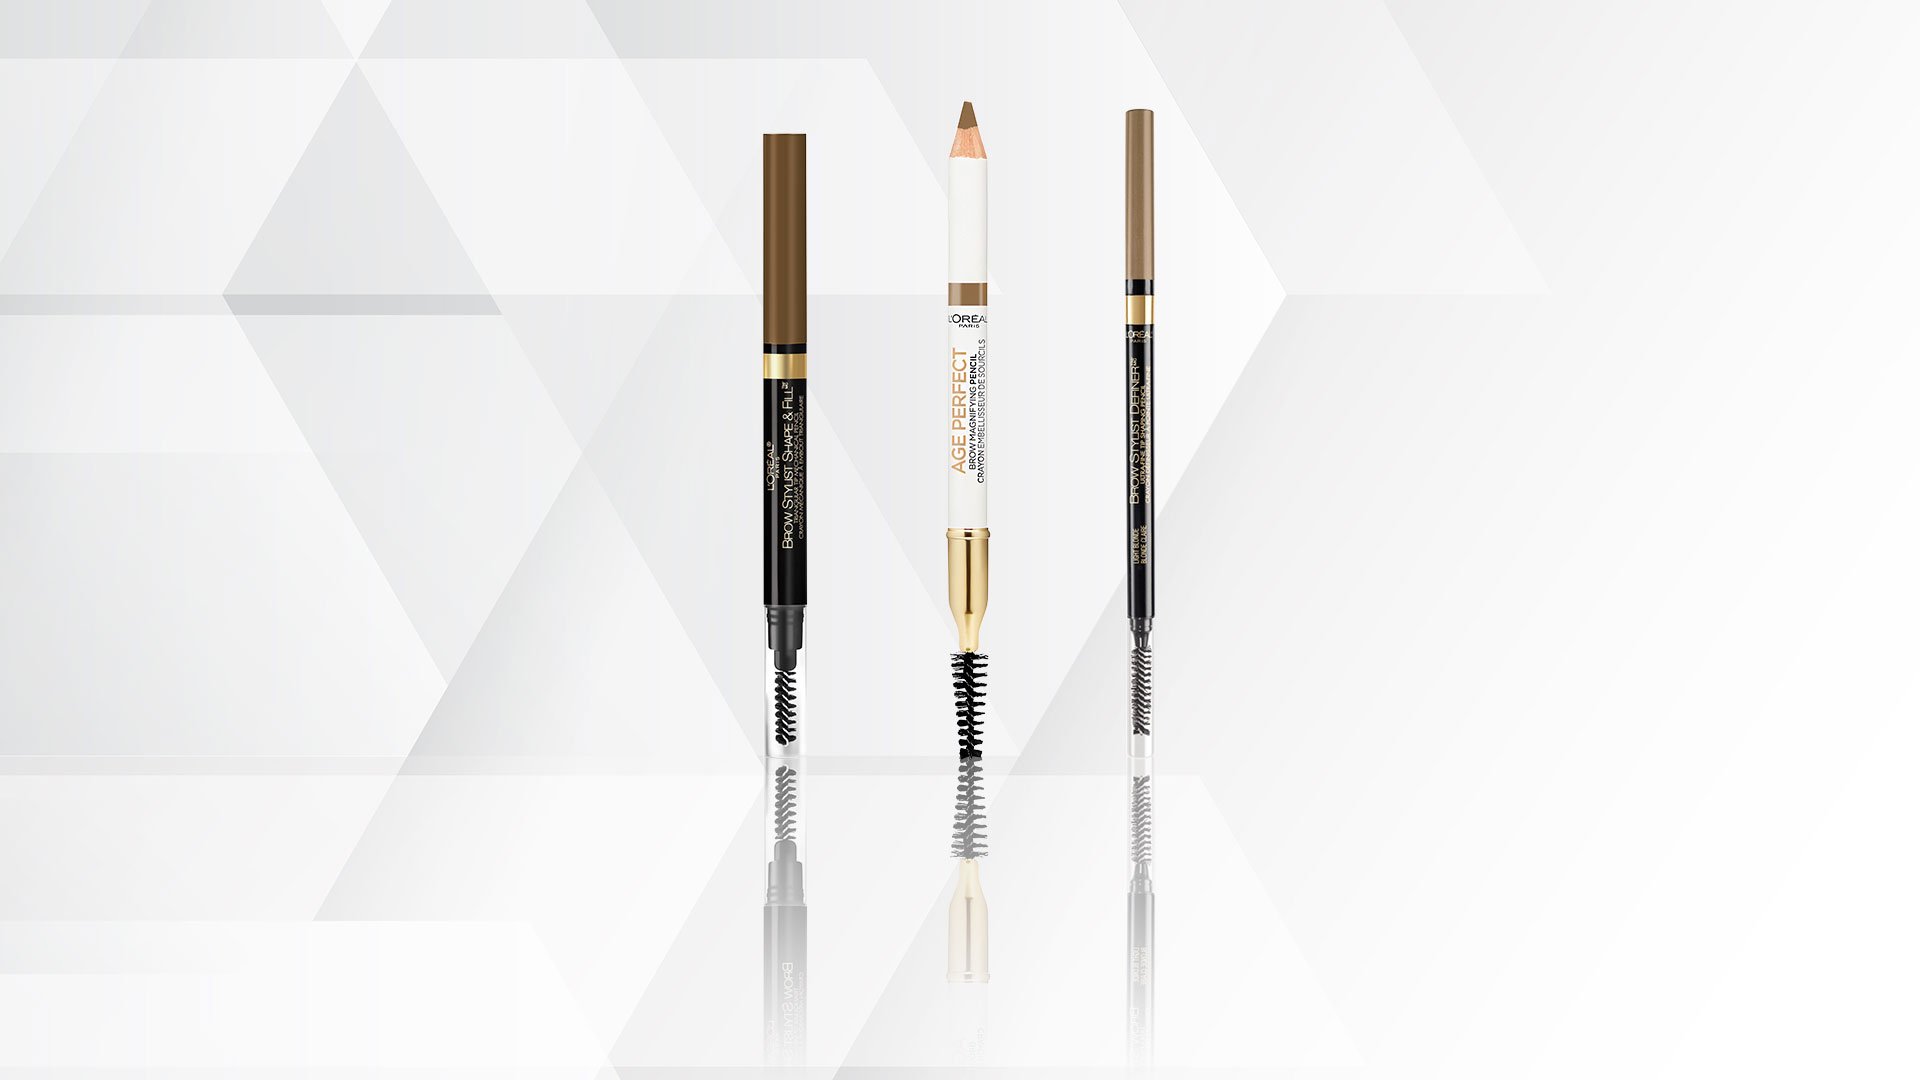 Loreal Paris Article 3 Drugstore Eyebrow Pencils That Are Worth the Hype D